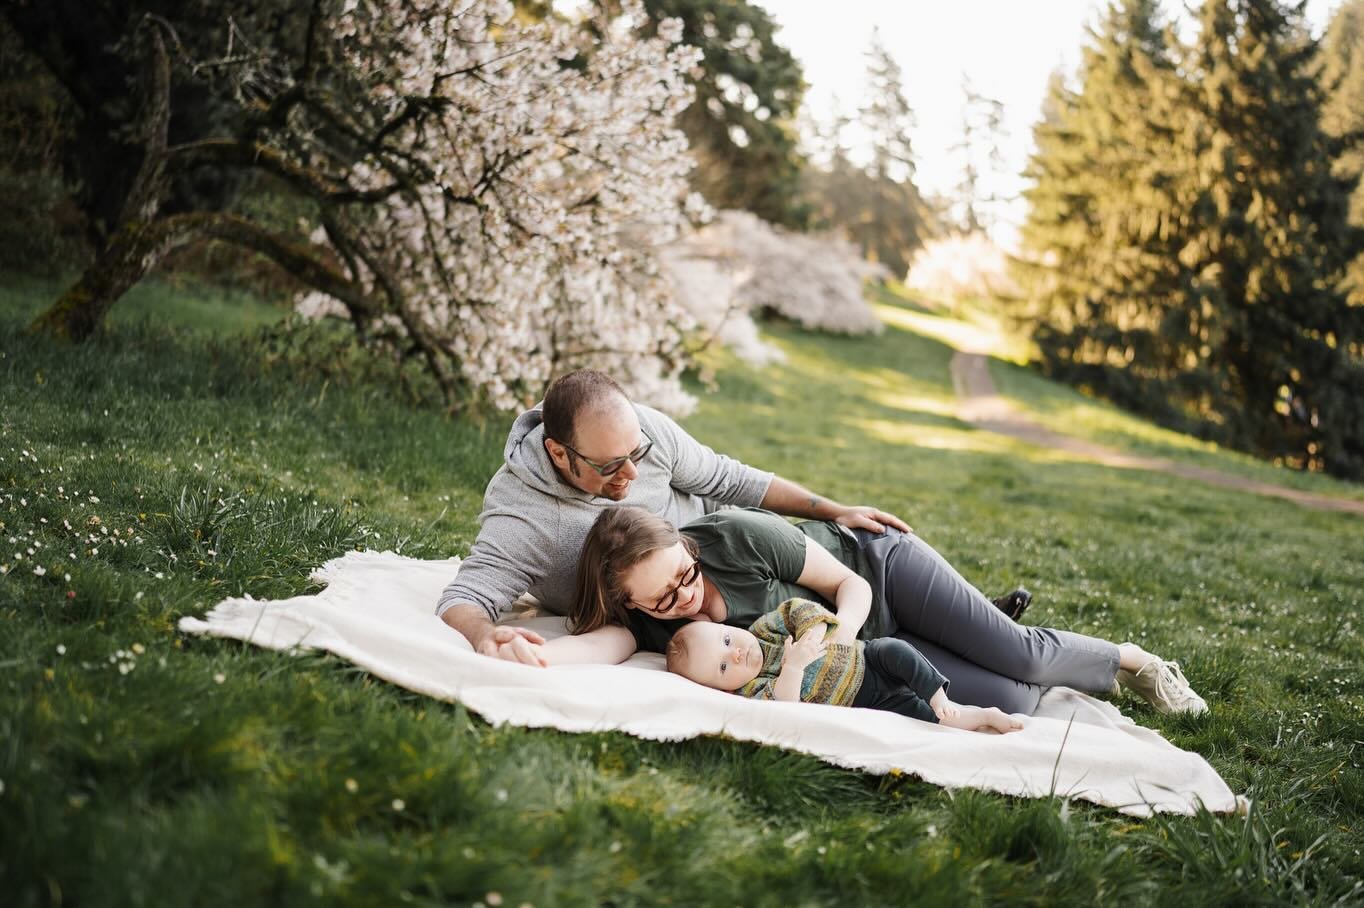 Here are some pretty photos of a cute family at Mt Tabor Park this spring with blooming trees - and the real centerpiece, a real sweet baby. 

May weekends are fully booked and June is getting there. If you want a spring/early summer family or newbor